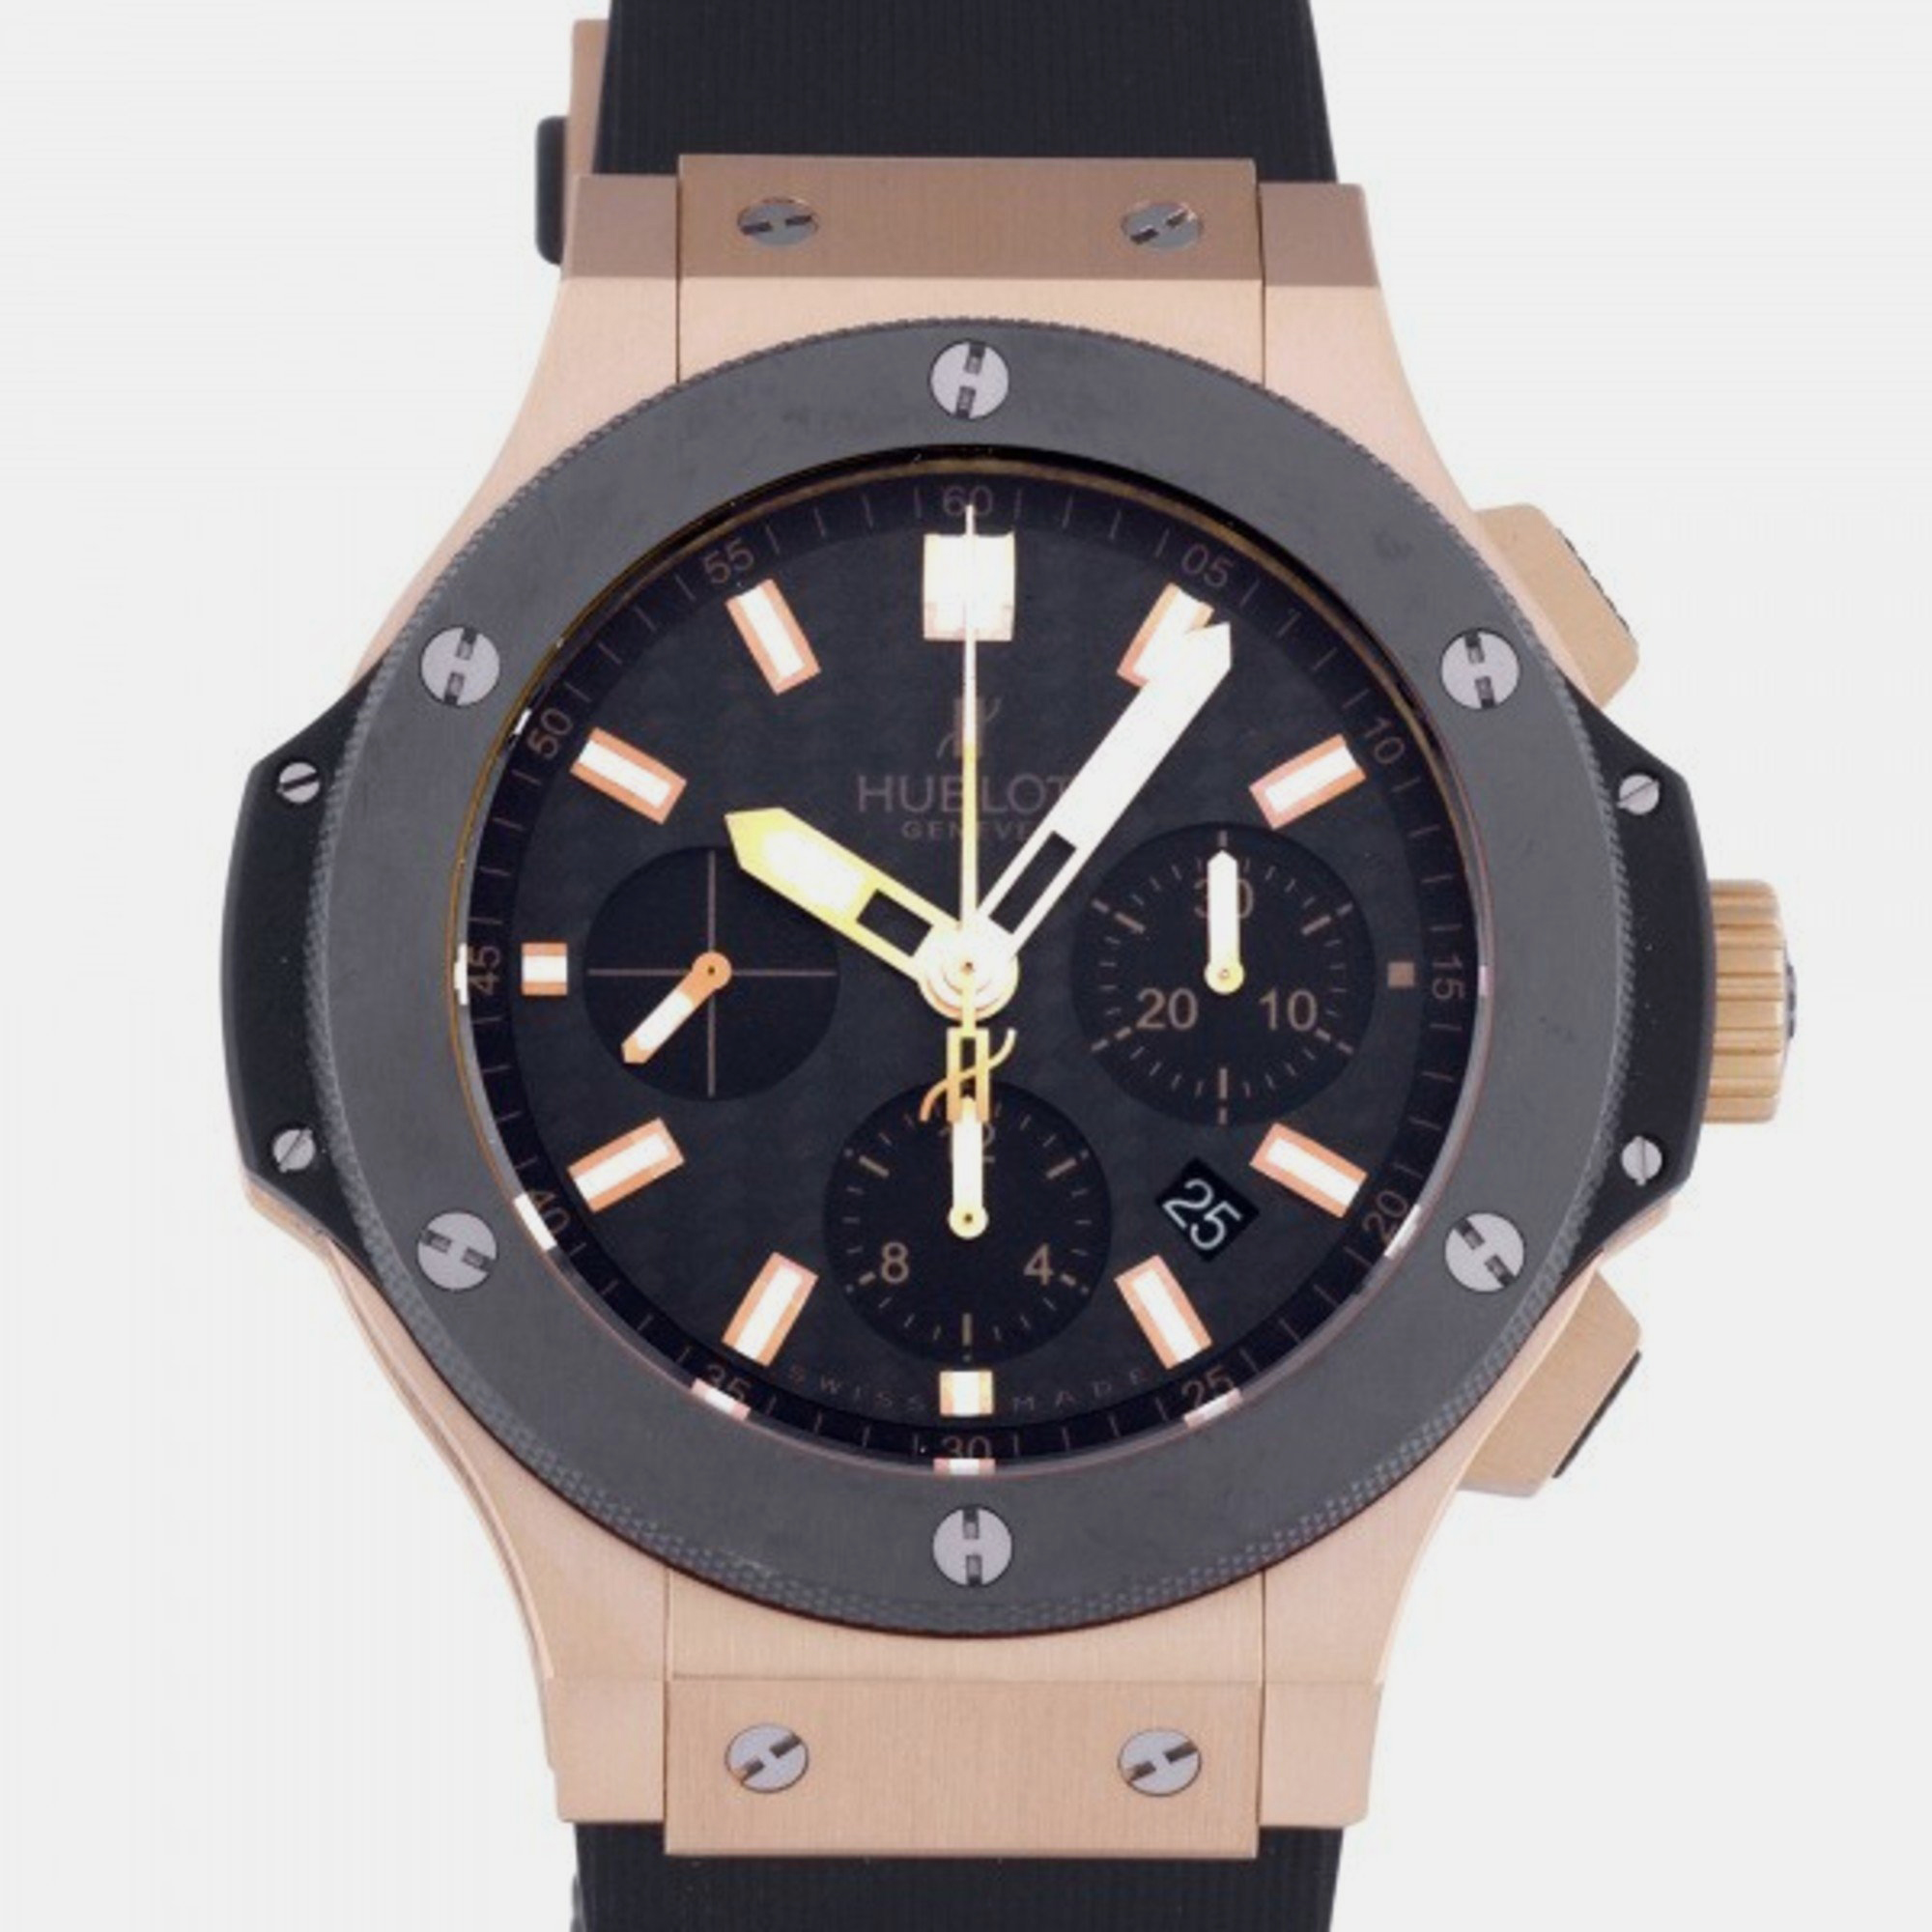 Pre-owned Hublot Black 18k Rose Gold And Ceramic Big Bang 301.pm.1780.rx Automatic Men's Wristwatch 44 Mm